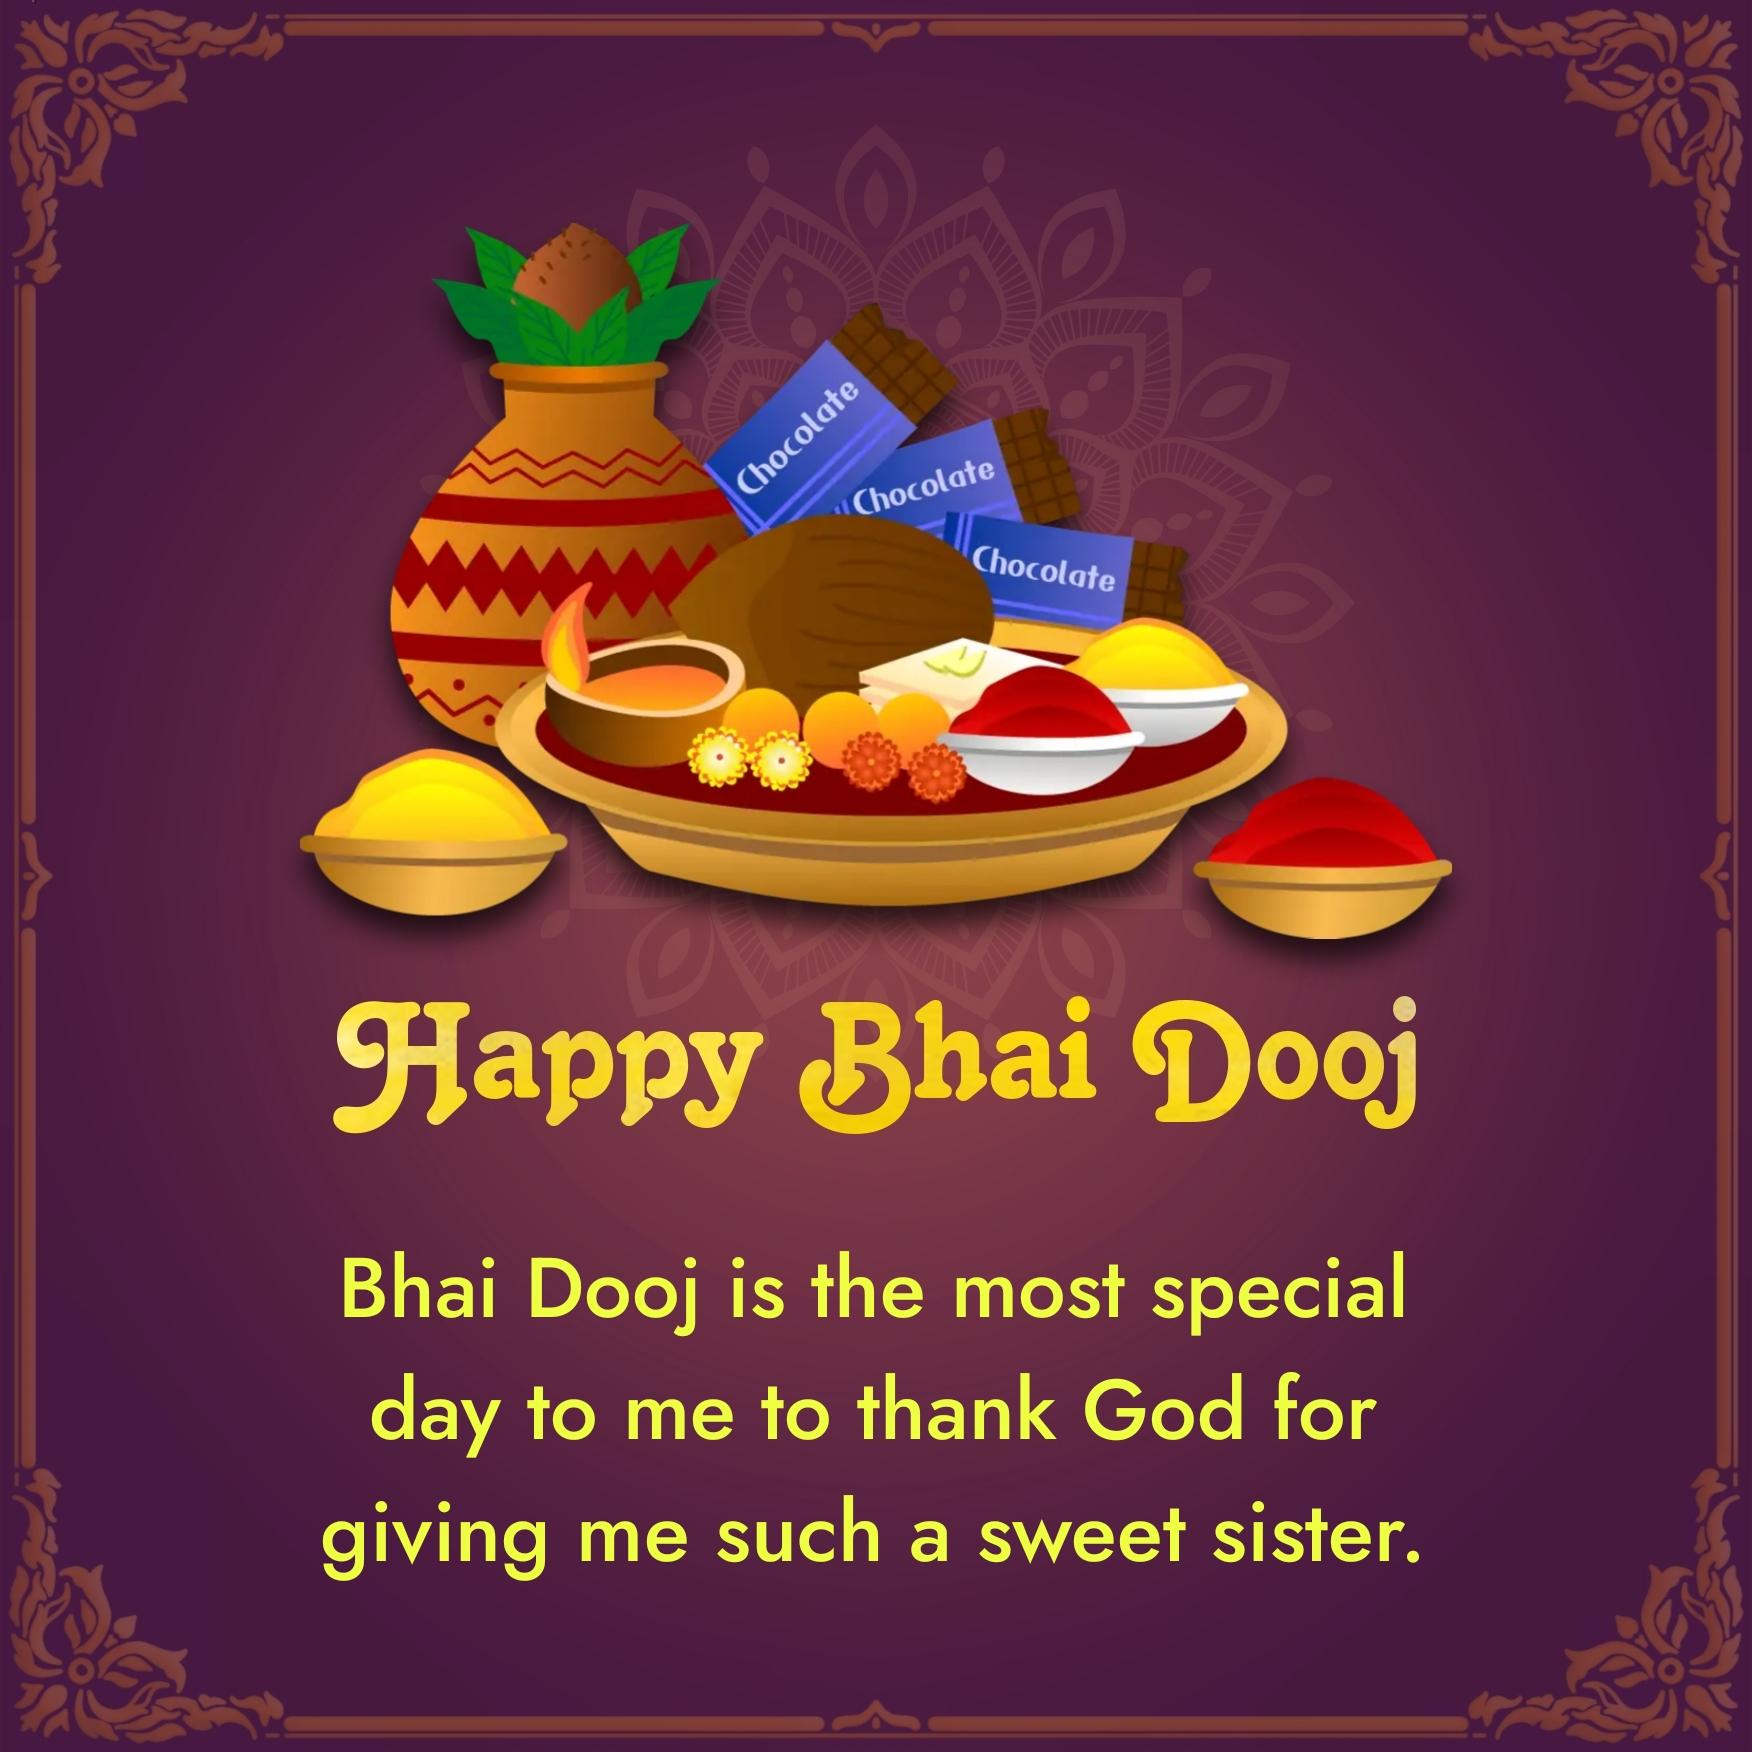 Bhai Dooj is the most special day to me to thank God